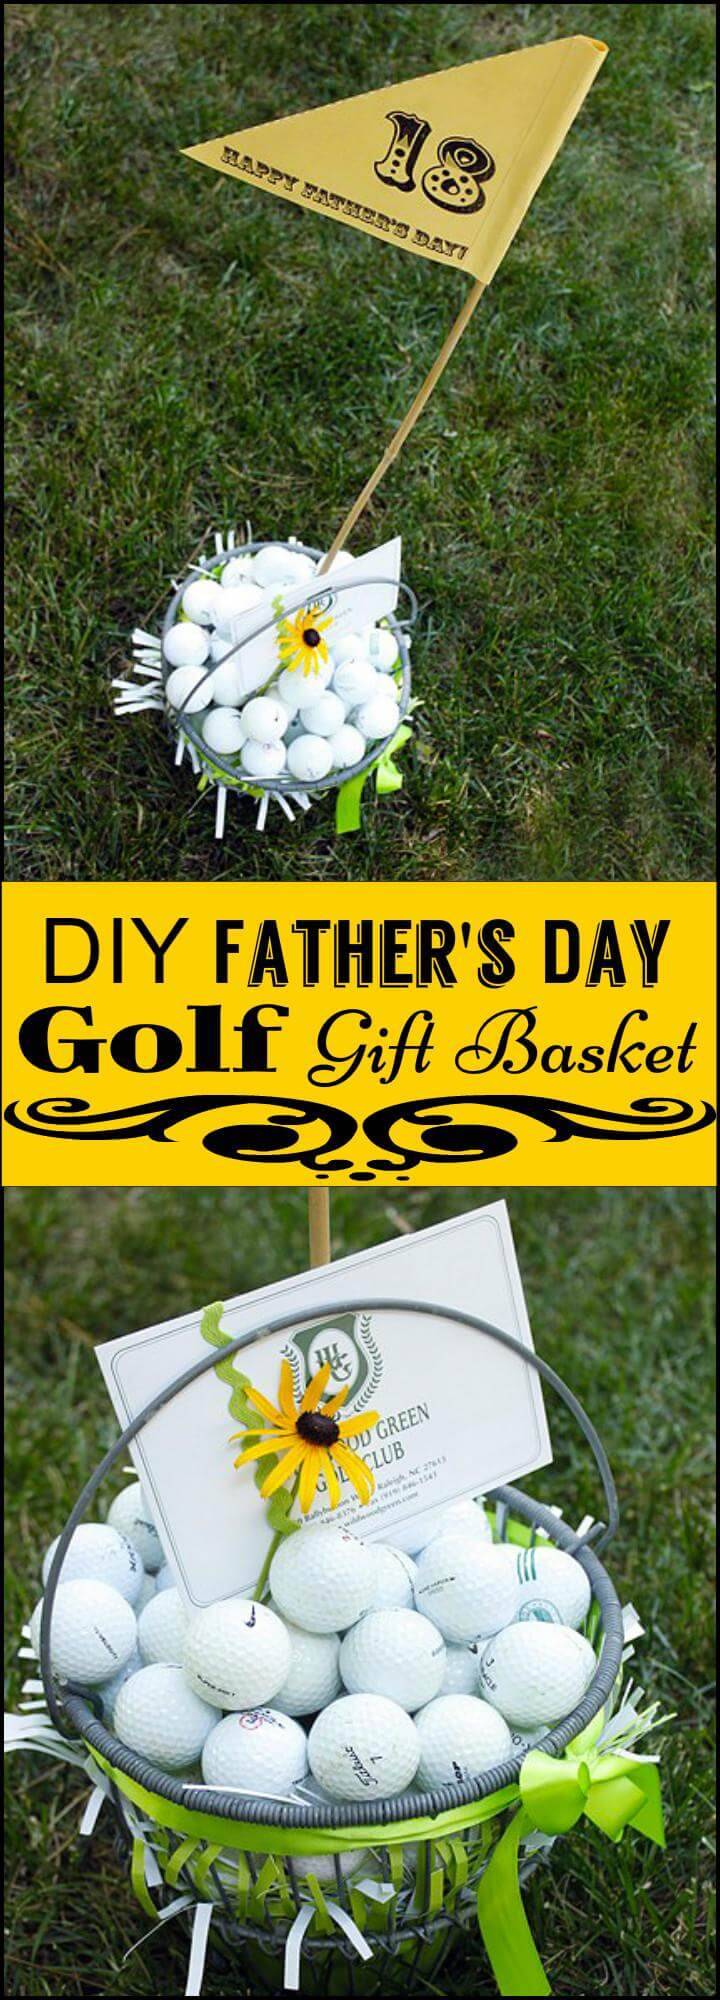 DIY Father's Day Golf Gift Basket